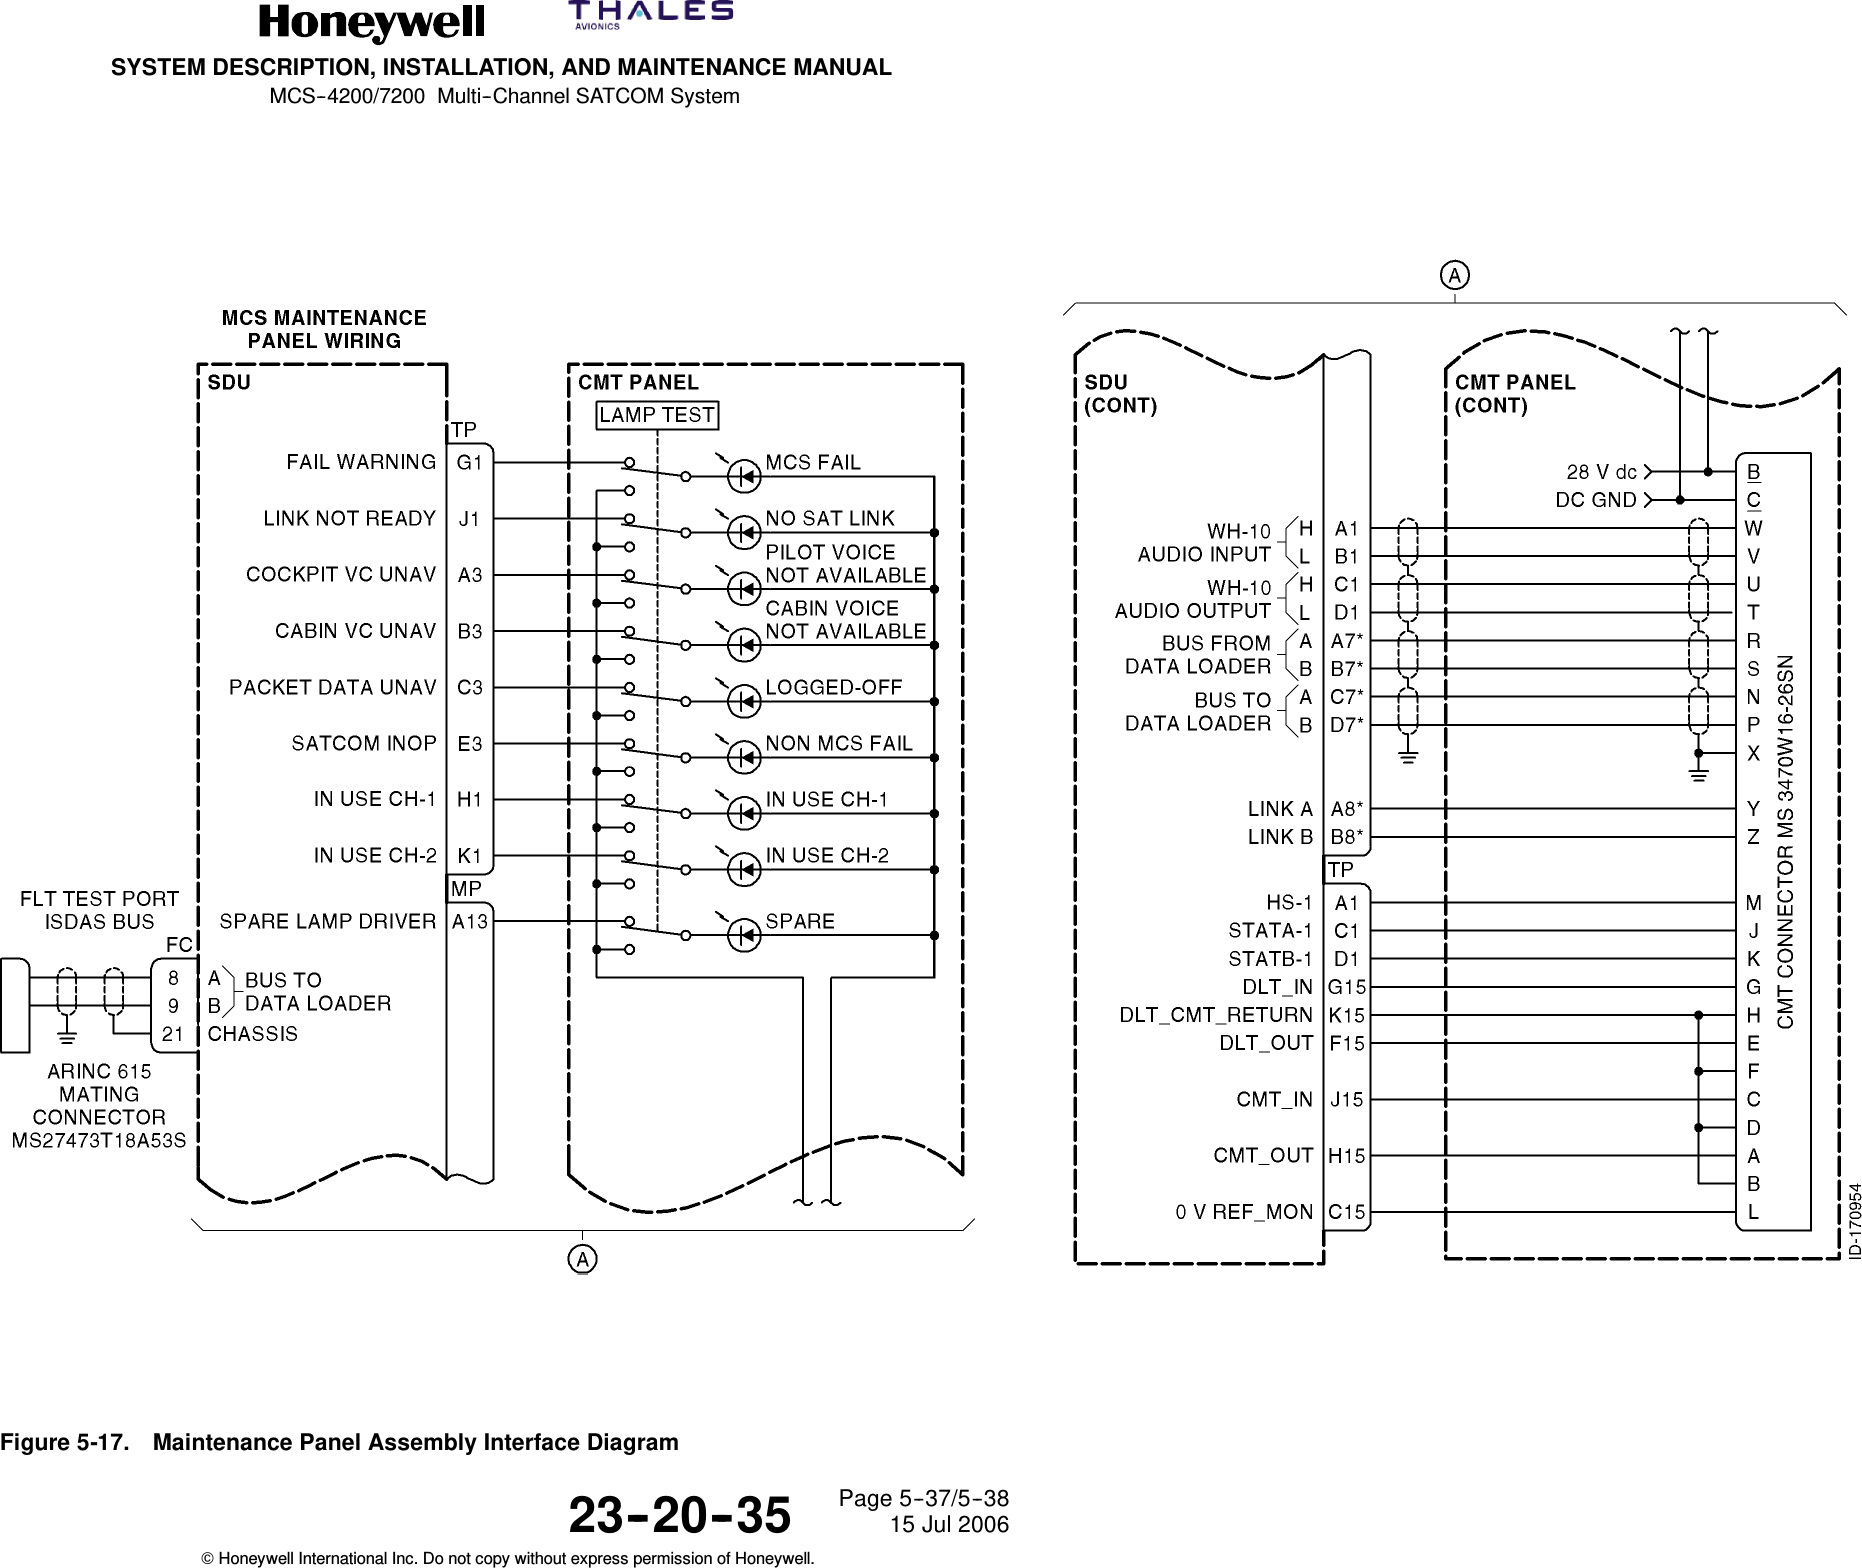 SYSTEM DESCRIPTION, INSTALLATION, AND MAINTENANCE MANUALMCS--4200/7200 Multi--Channel SATCOM System23--20--35 15 Jul 2006Honeywell International Inc. Do not copy without express permission of Honeywell.Page 5--37/5--38Figure 5-17. Maintenance Panel Assembly Interface Diagram